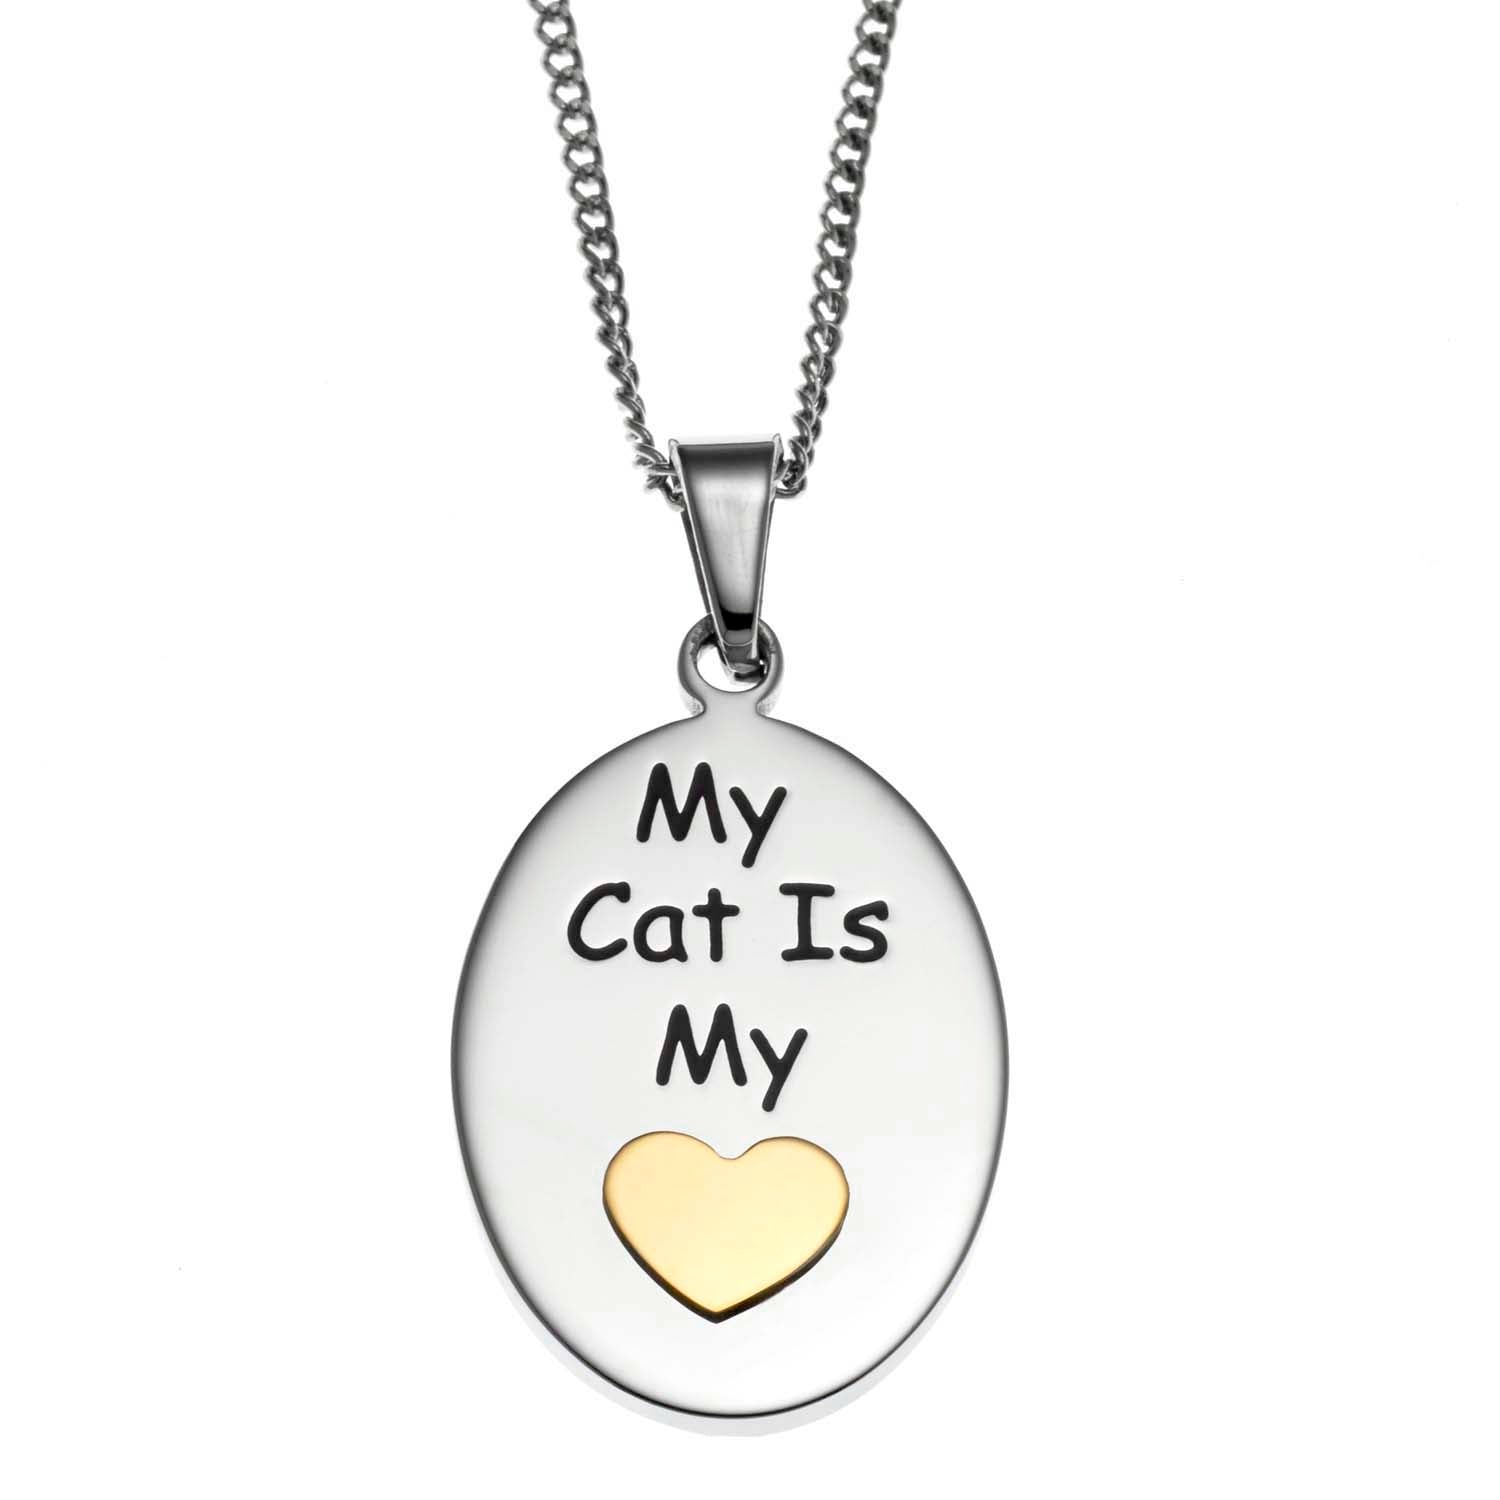 My Cat is My Heart Stainless Steel & Gold-Plated Pendant Necklace - Sentimental Cat Lover Jewelry Gift